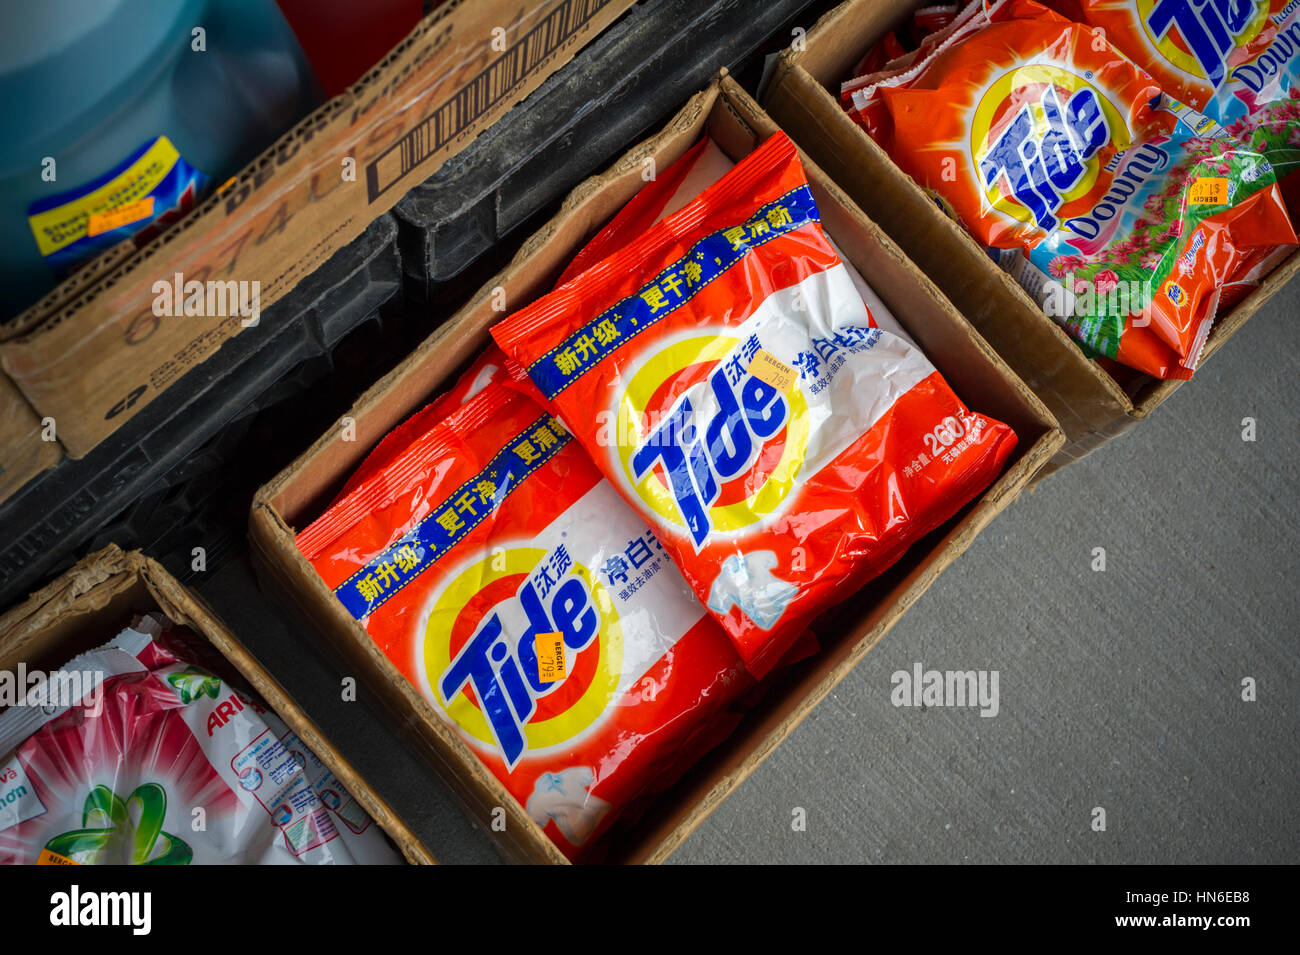 Packages of Procter & Gamble's Tide detergent in English and Chinese in the Melrose neighborhood of the Bronx in New York Sunday, February 5, 2017. Tide is the largest selling detergent in the world. (© Richard B. Levine) Stock Photo